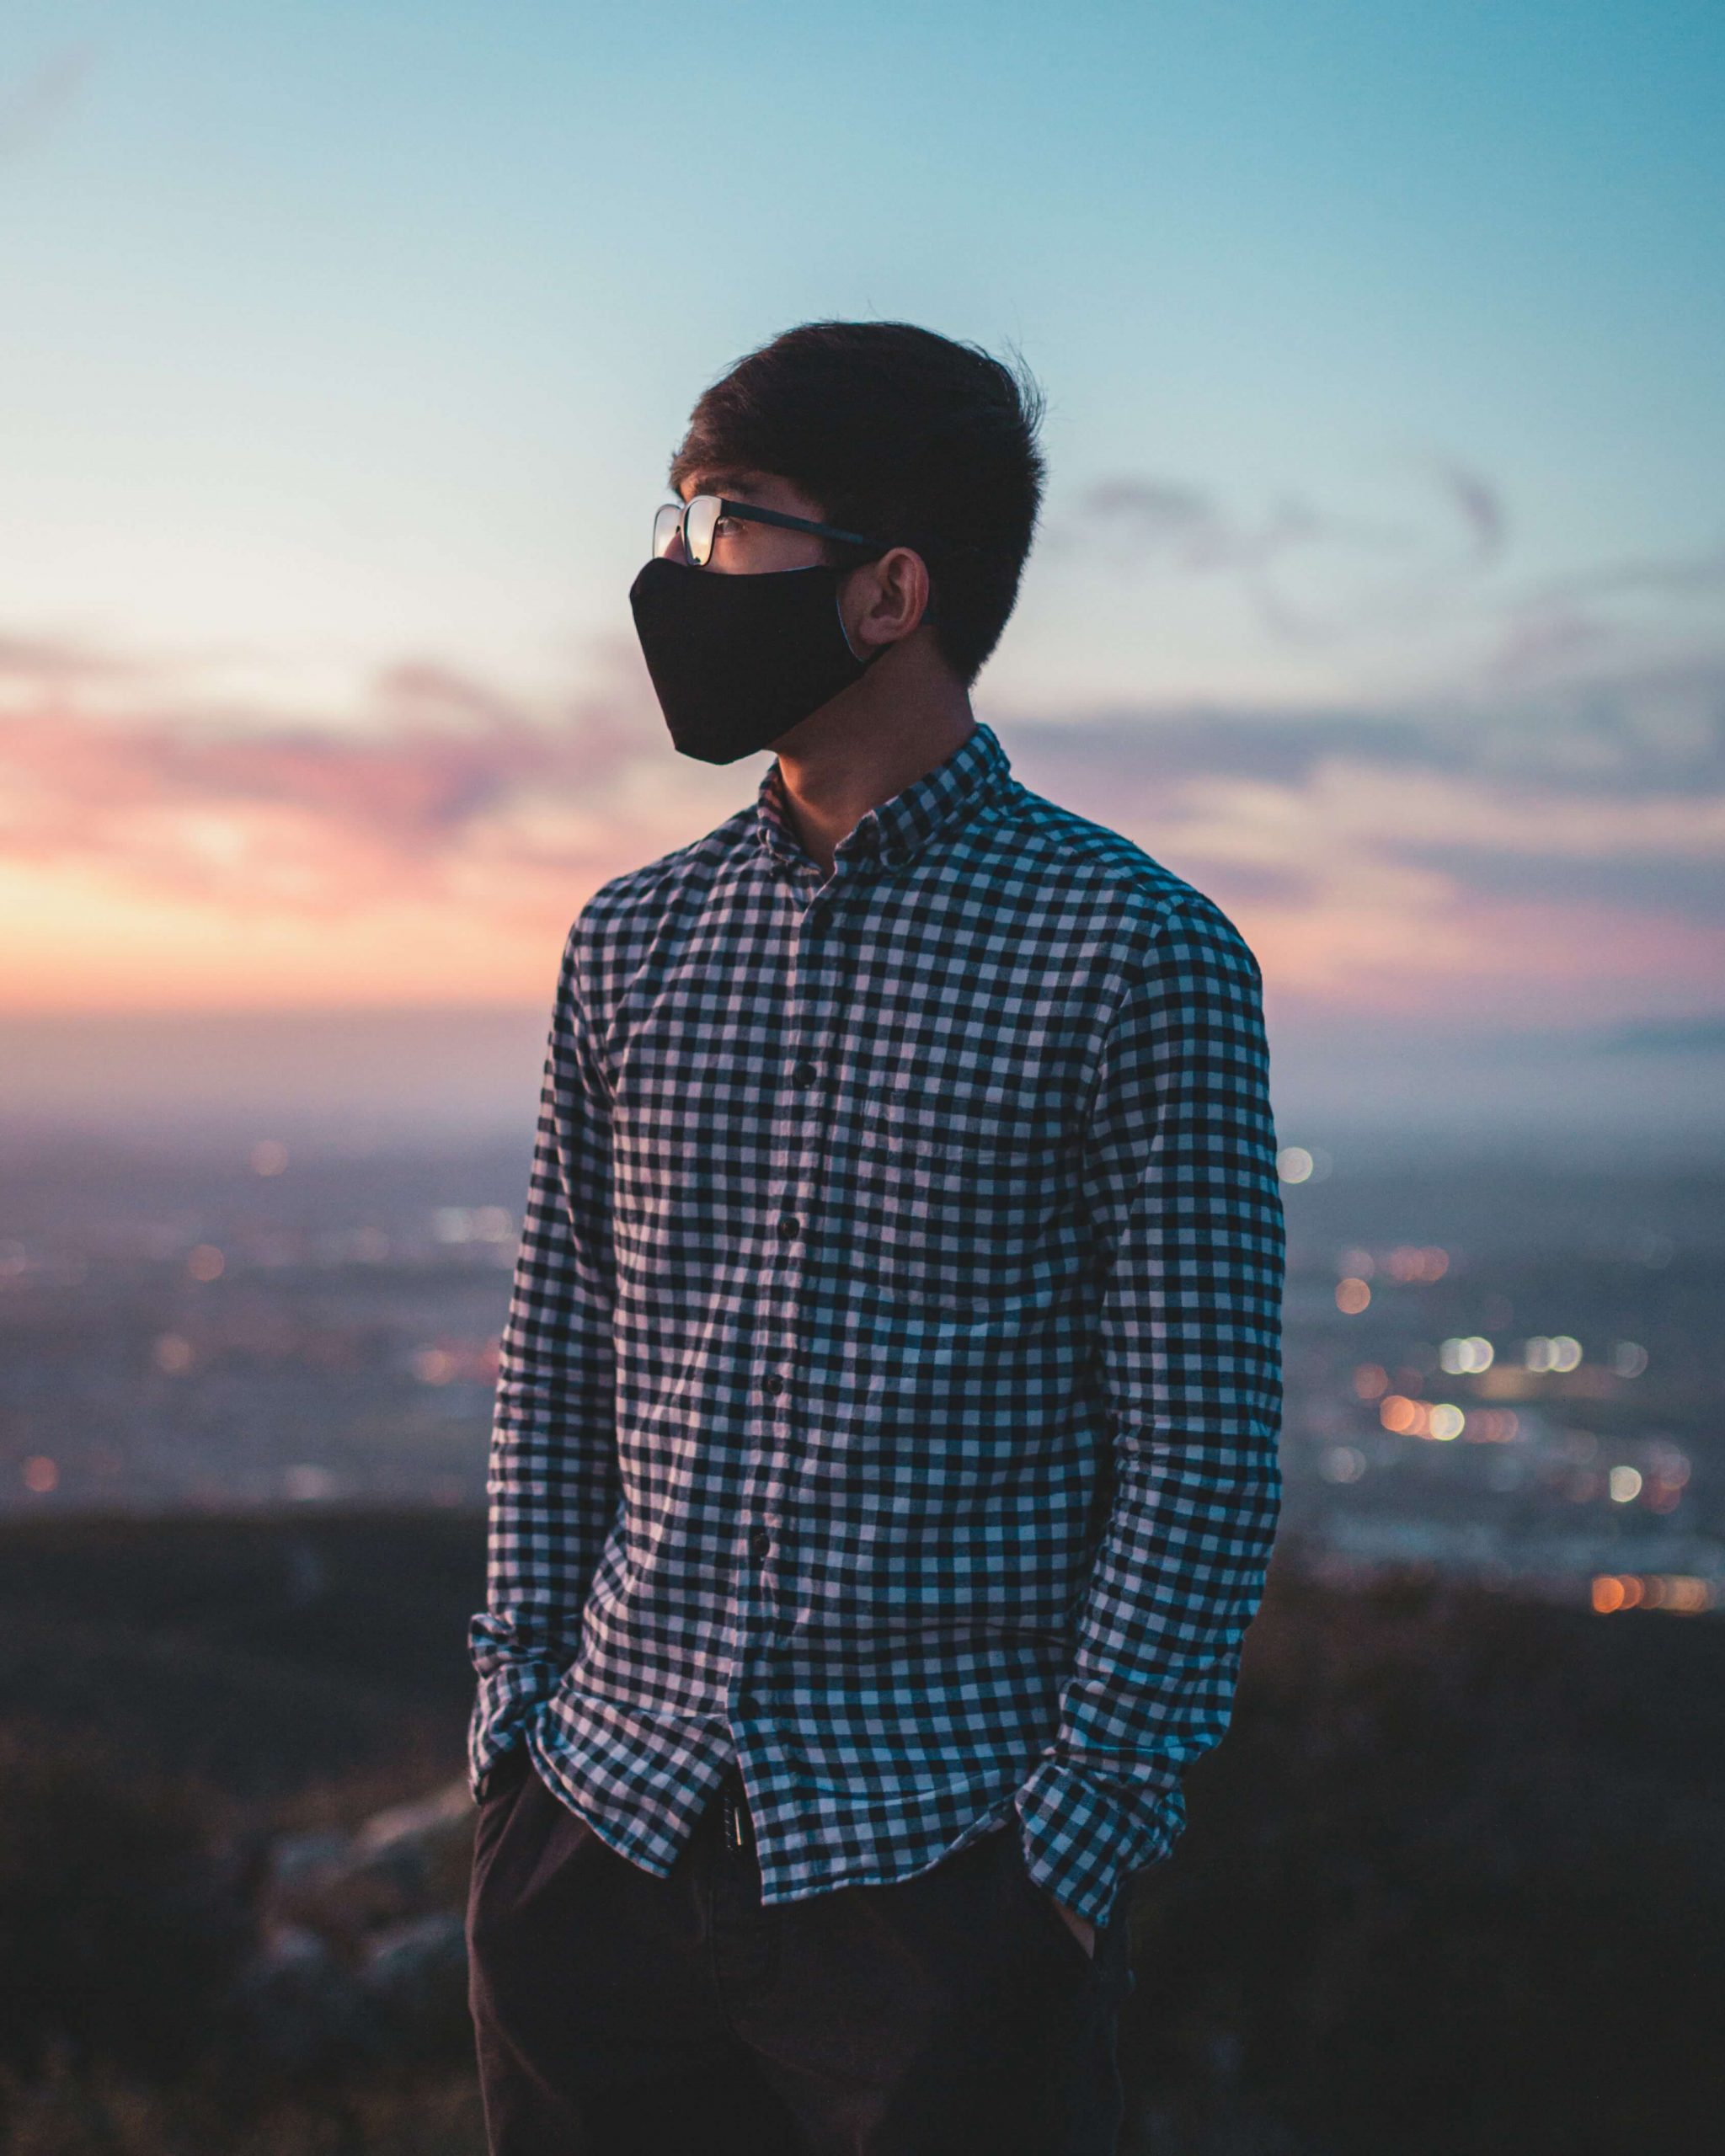 guy in mask overlooking hill